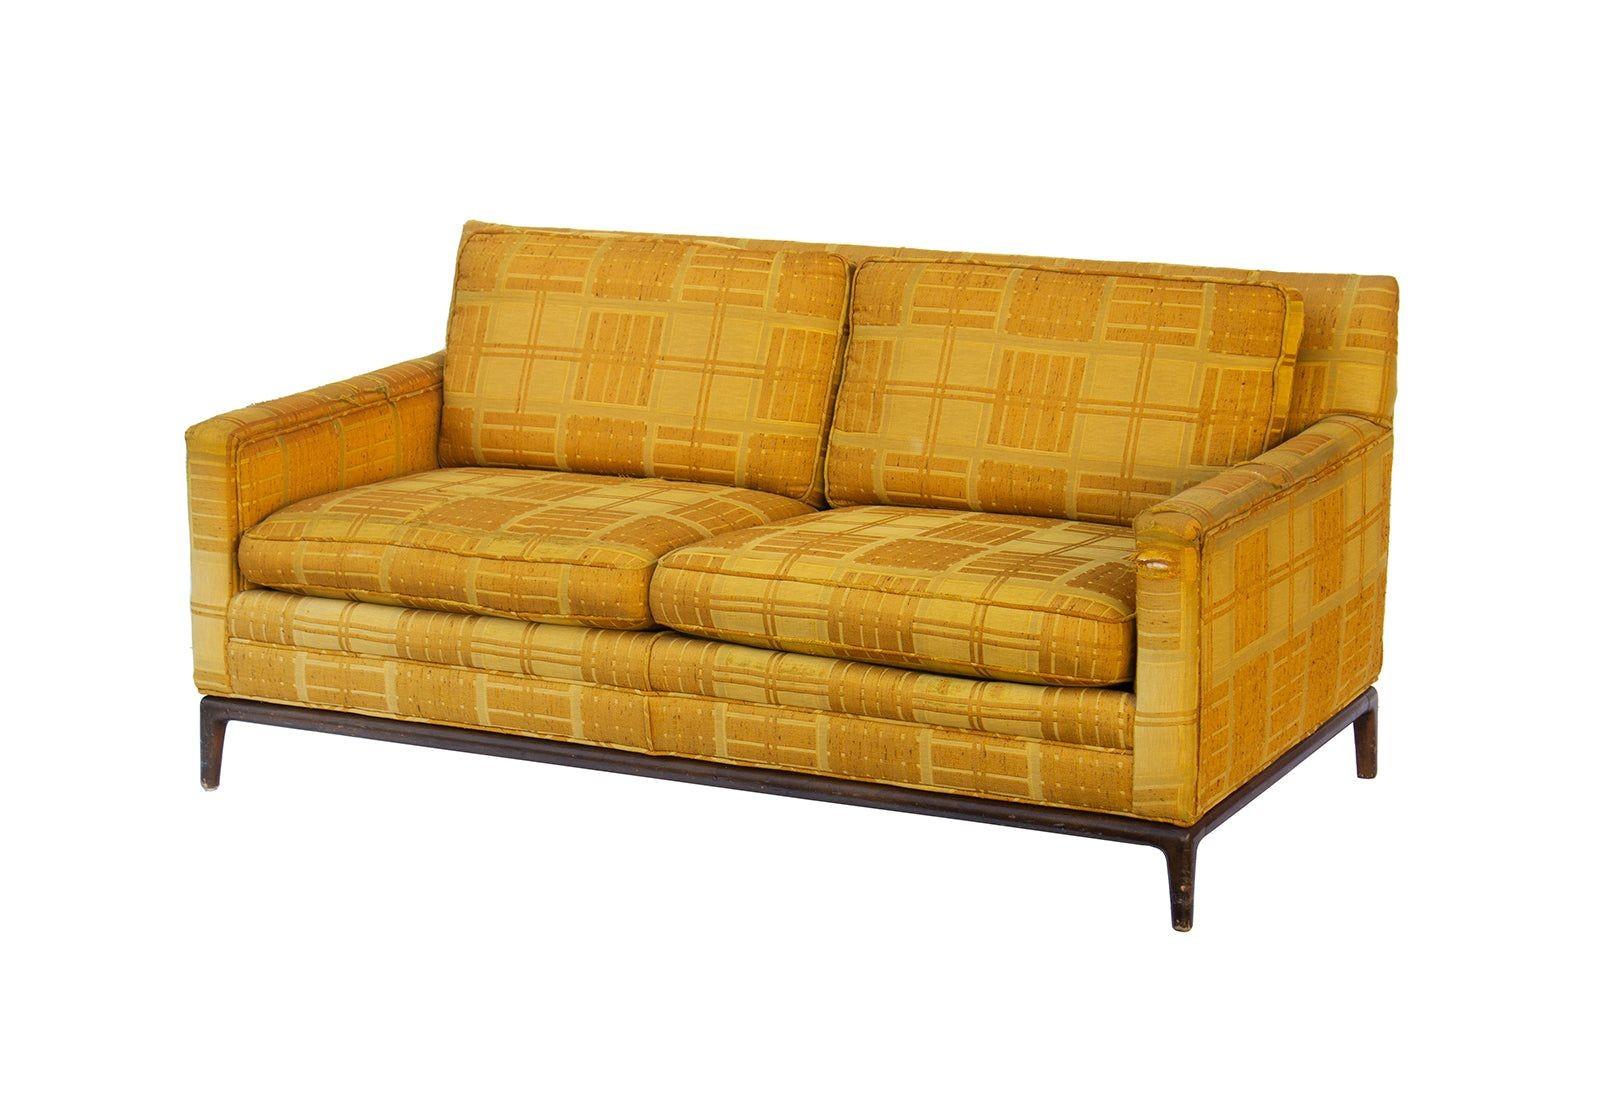 USA, 1960s
Classic and comfortable midcentury modern loveseat with a sculpted walnut base. This sofa has such excellent scale and looks great from every angle. The walnut base has curves in all the right places. A very comfortable design, full scale